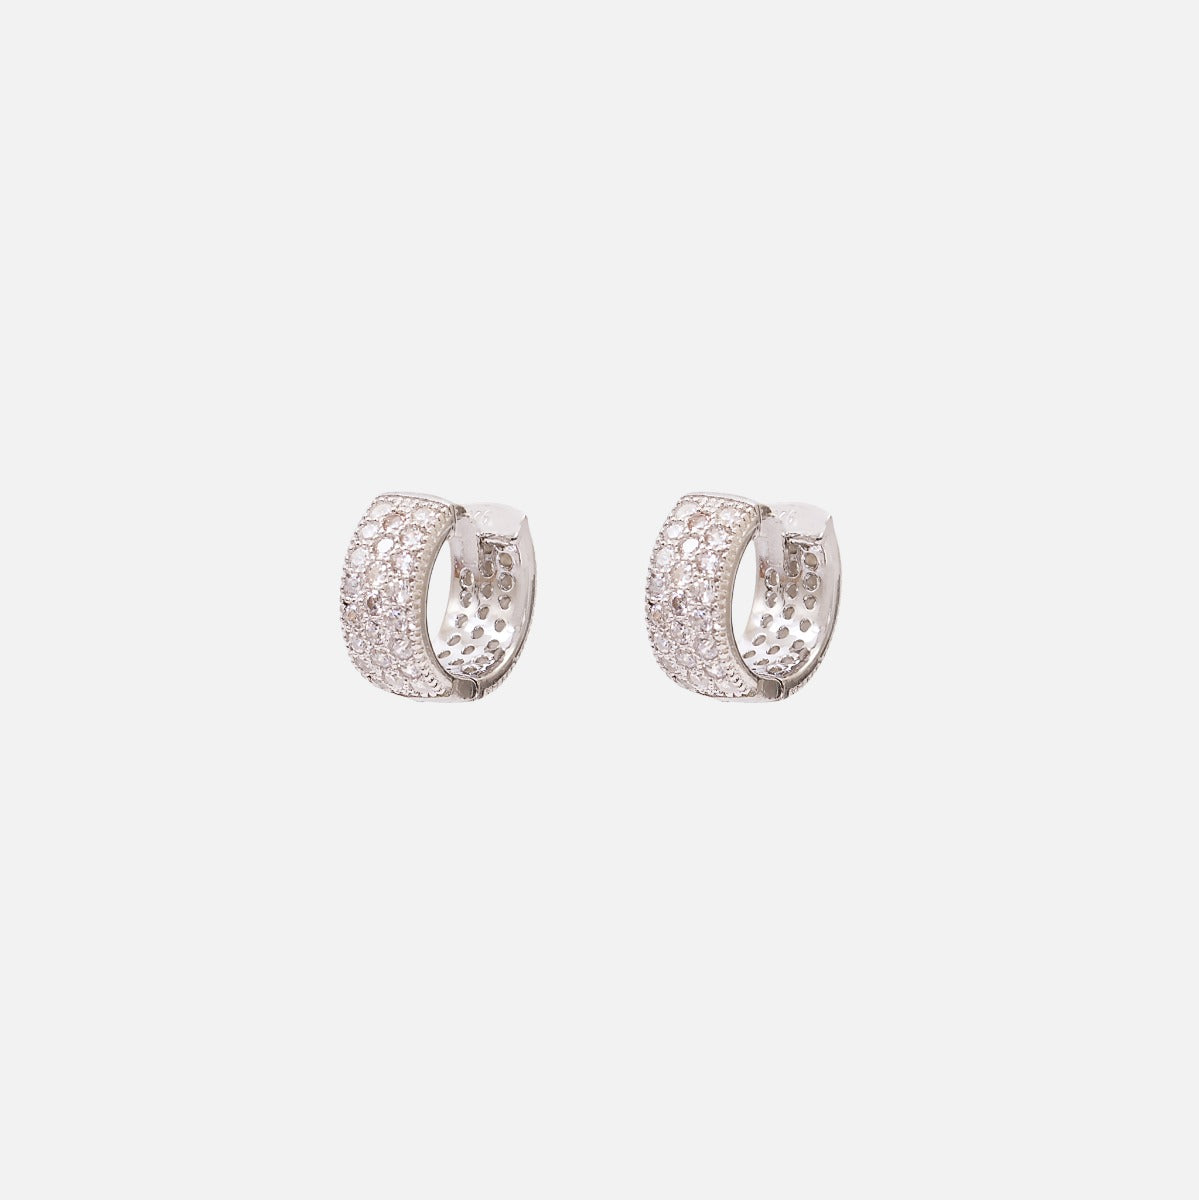 Sterling silver large hoop earrings with cubic zirconia inserts